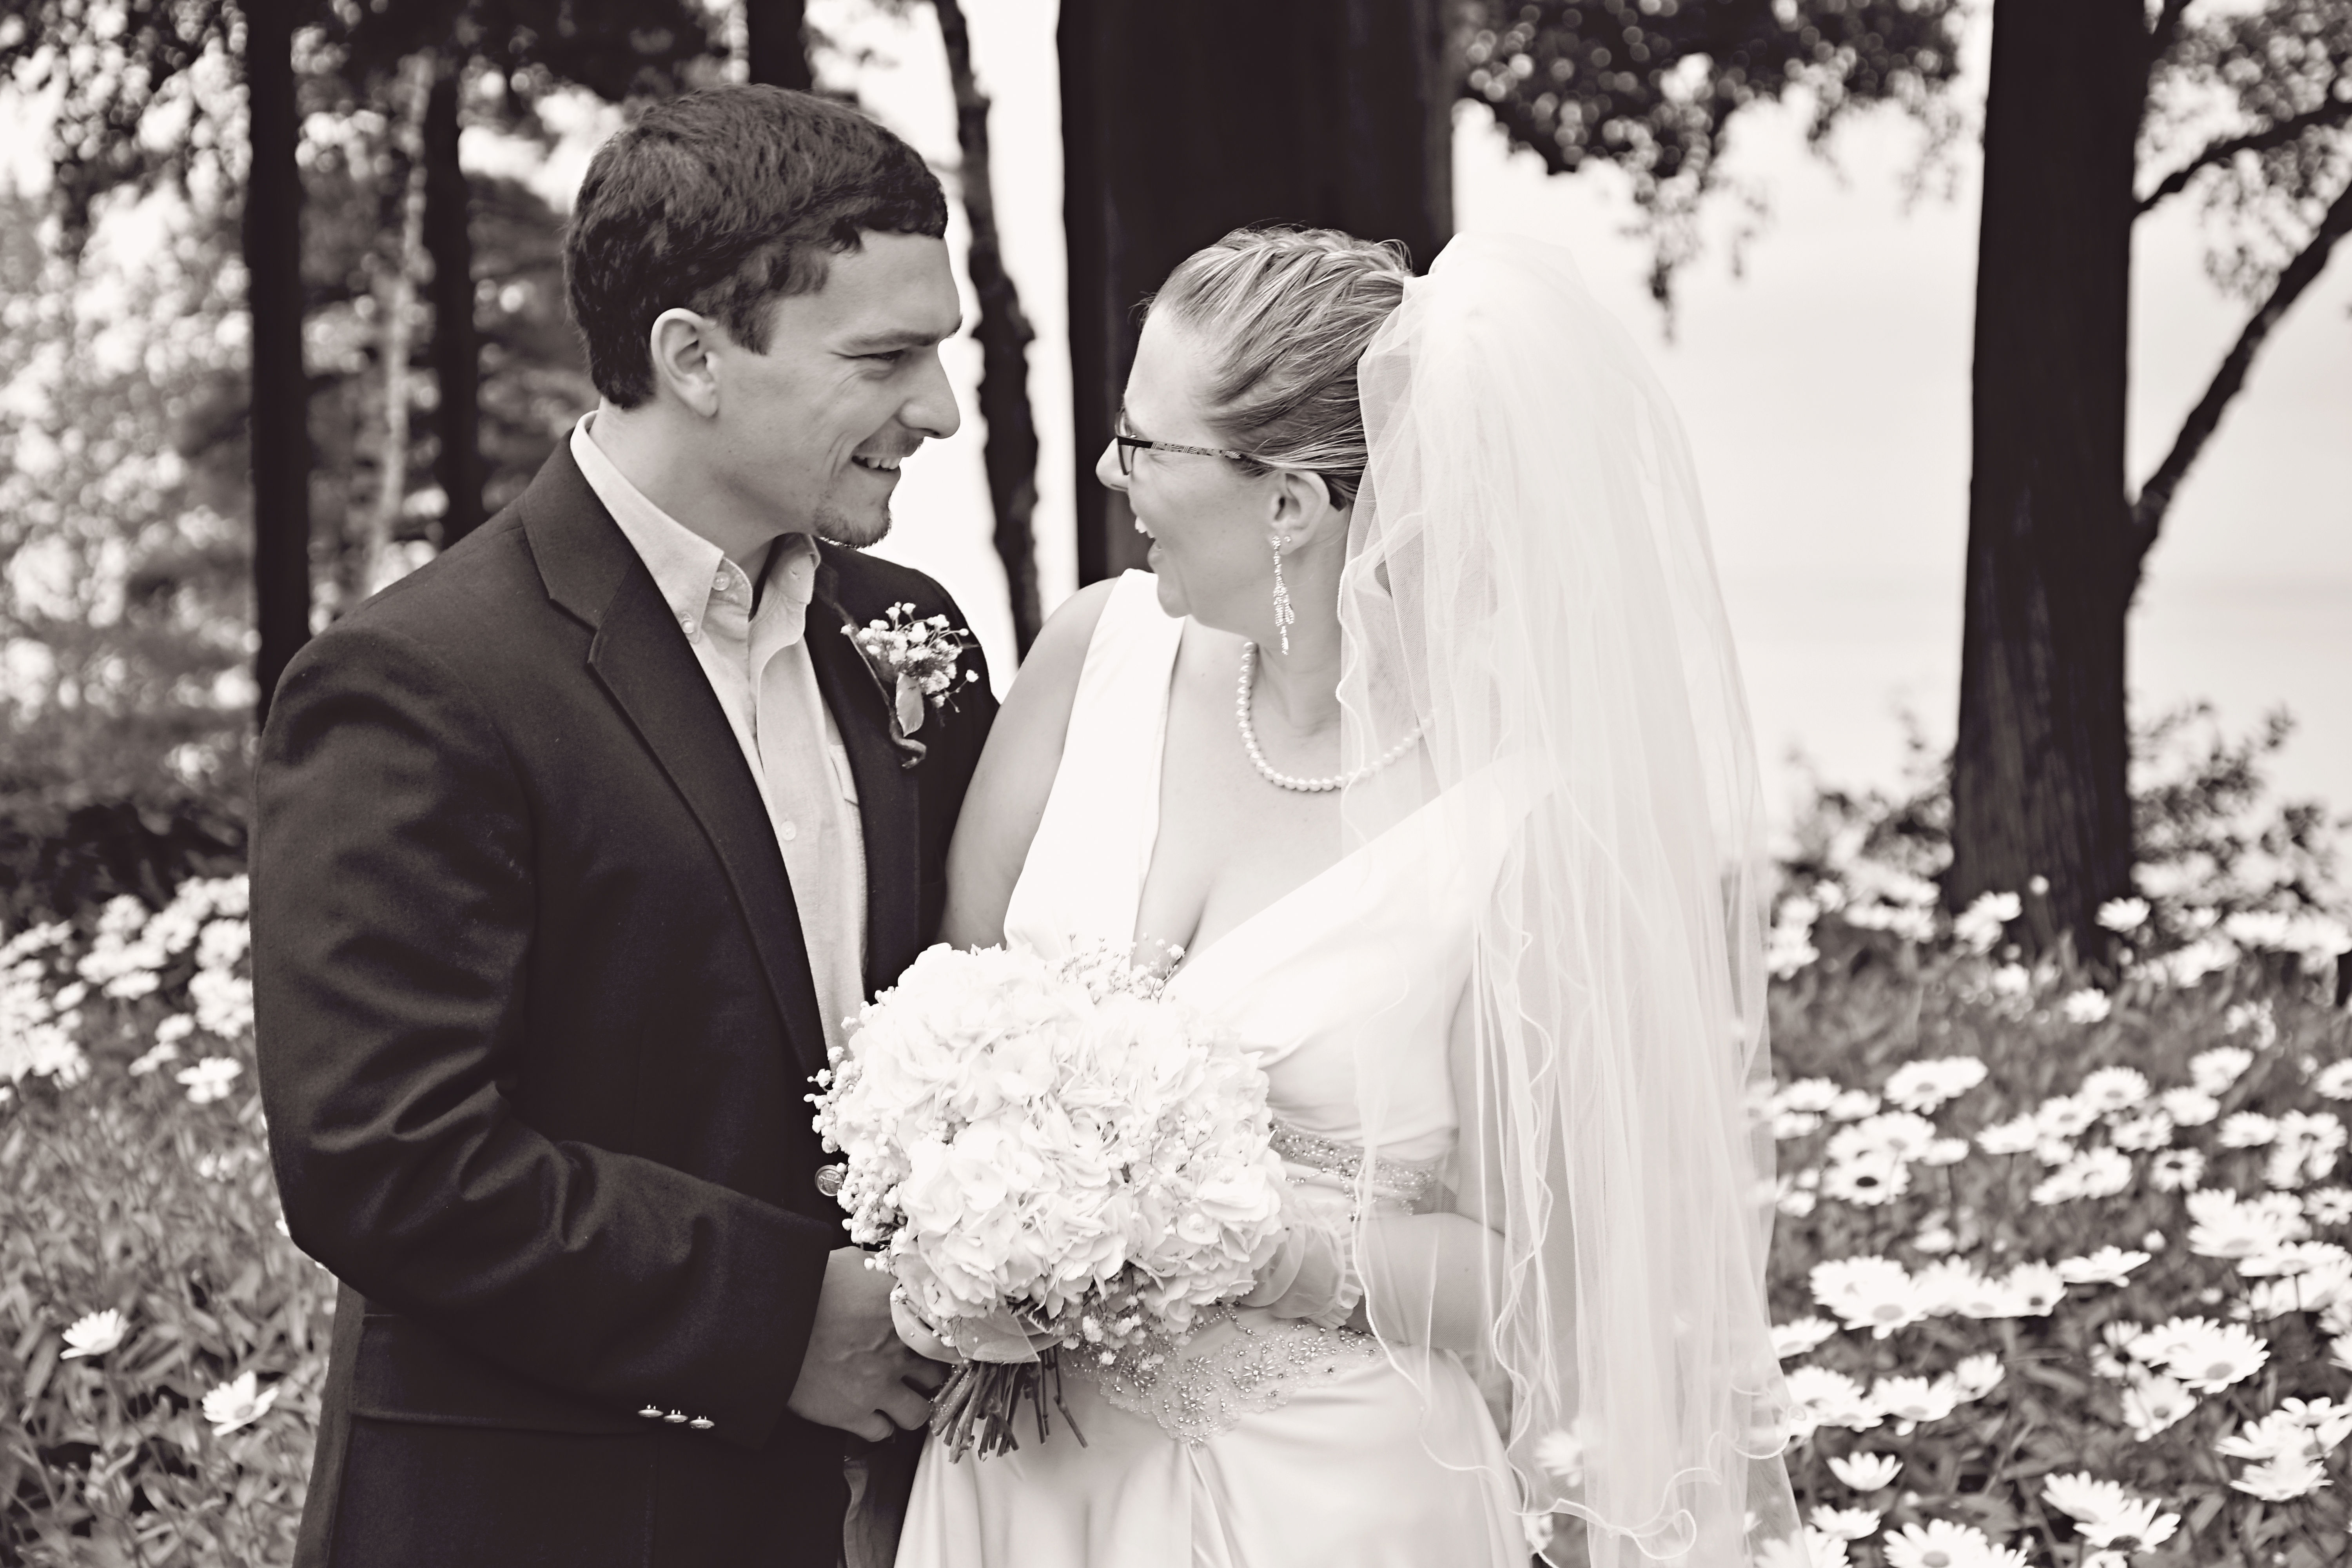 Black and white photo of groom and bride smiling at each other with garden and flowers in the background